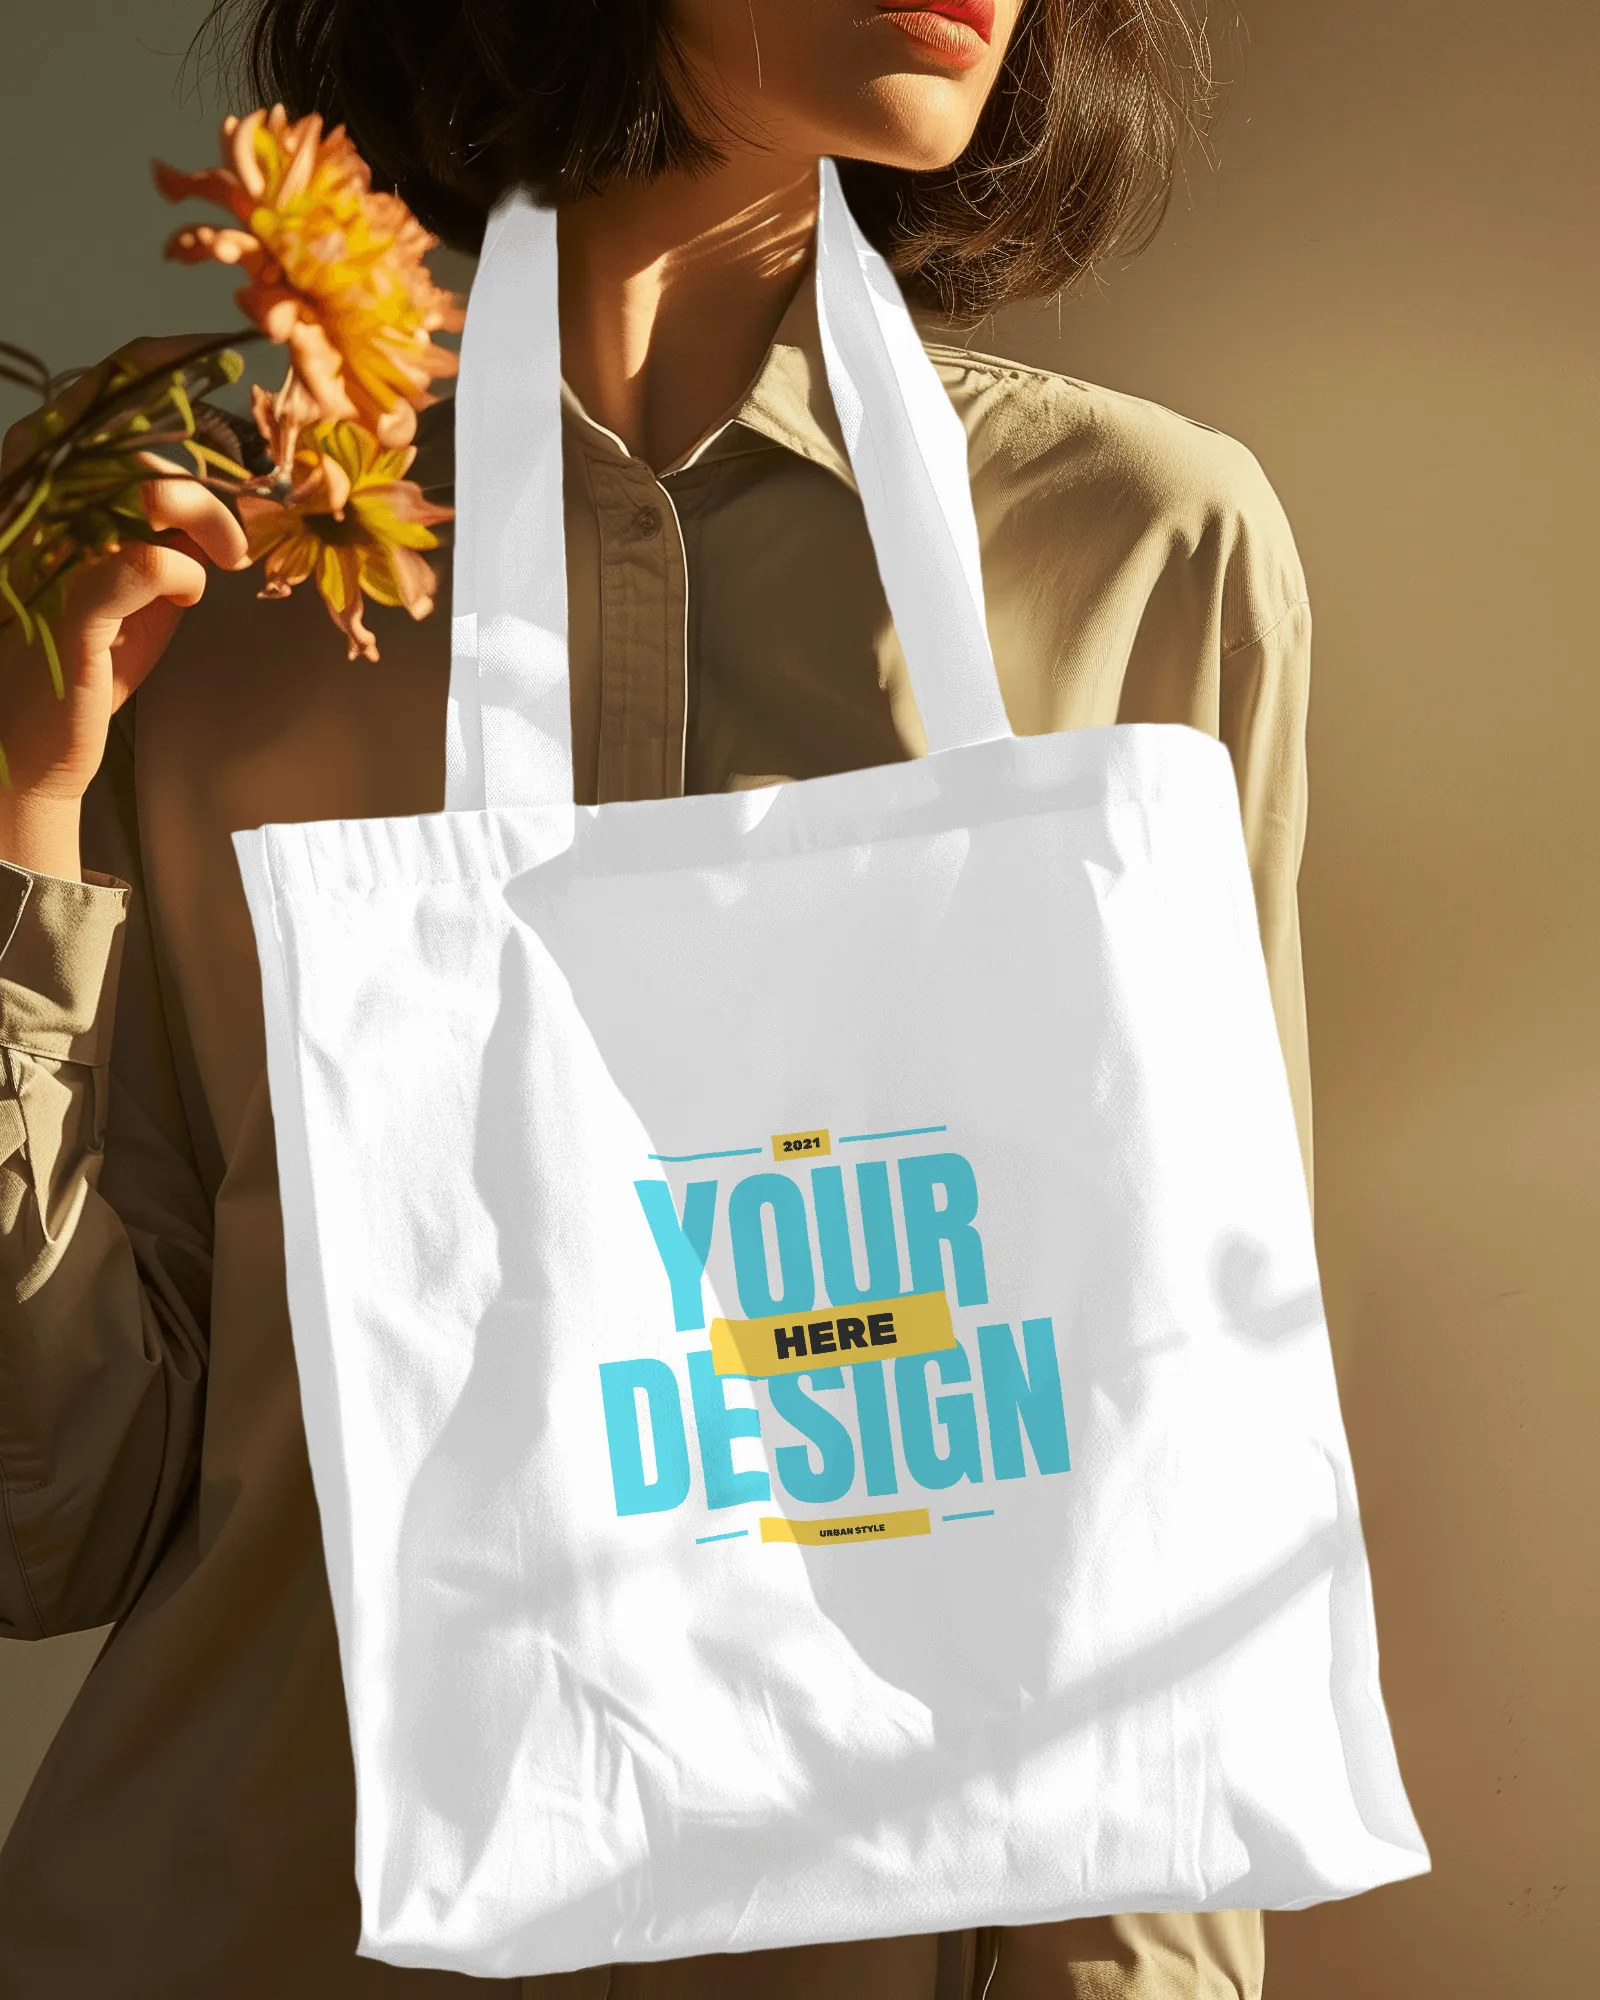 girl with flowers wearing tote bag mockup in neck scene